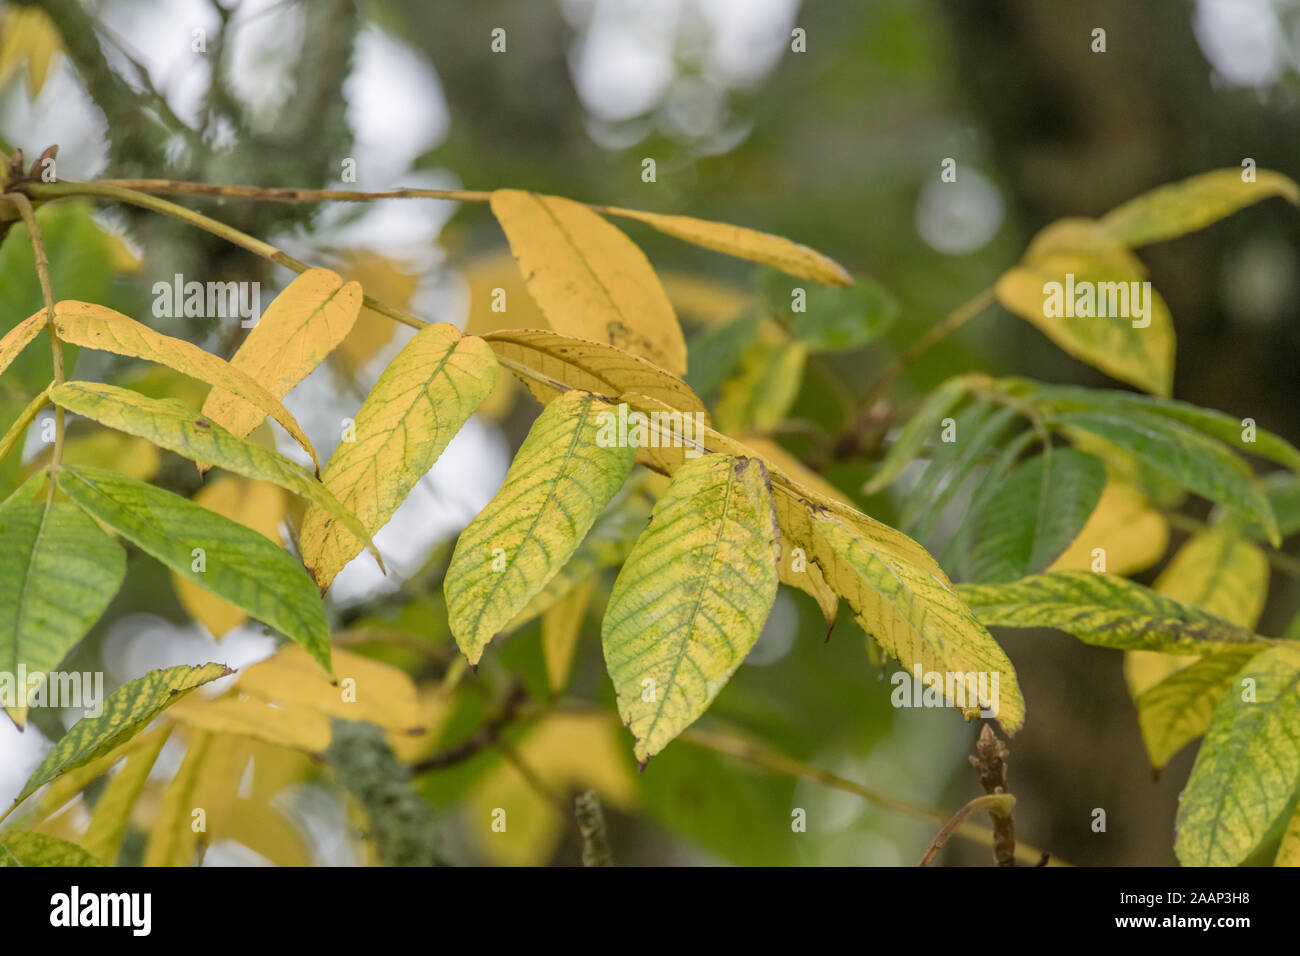 Autumnal yellowing leaves and foliage of Japanese Walnut - Juglans ailantifolia. Parts used in medicinal remedies, herbal remedies. SEE NOTES Stock Photo